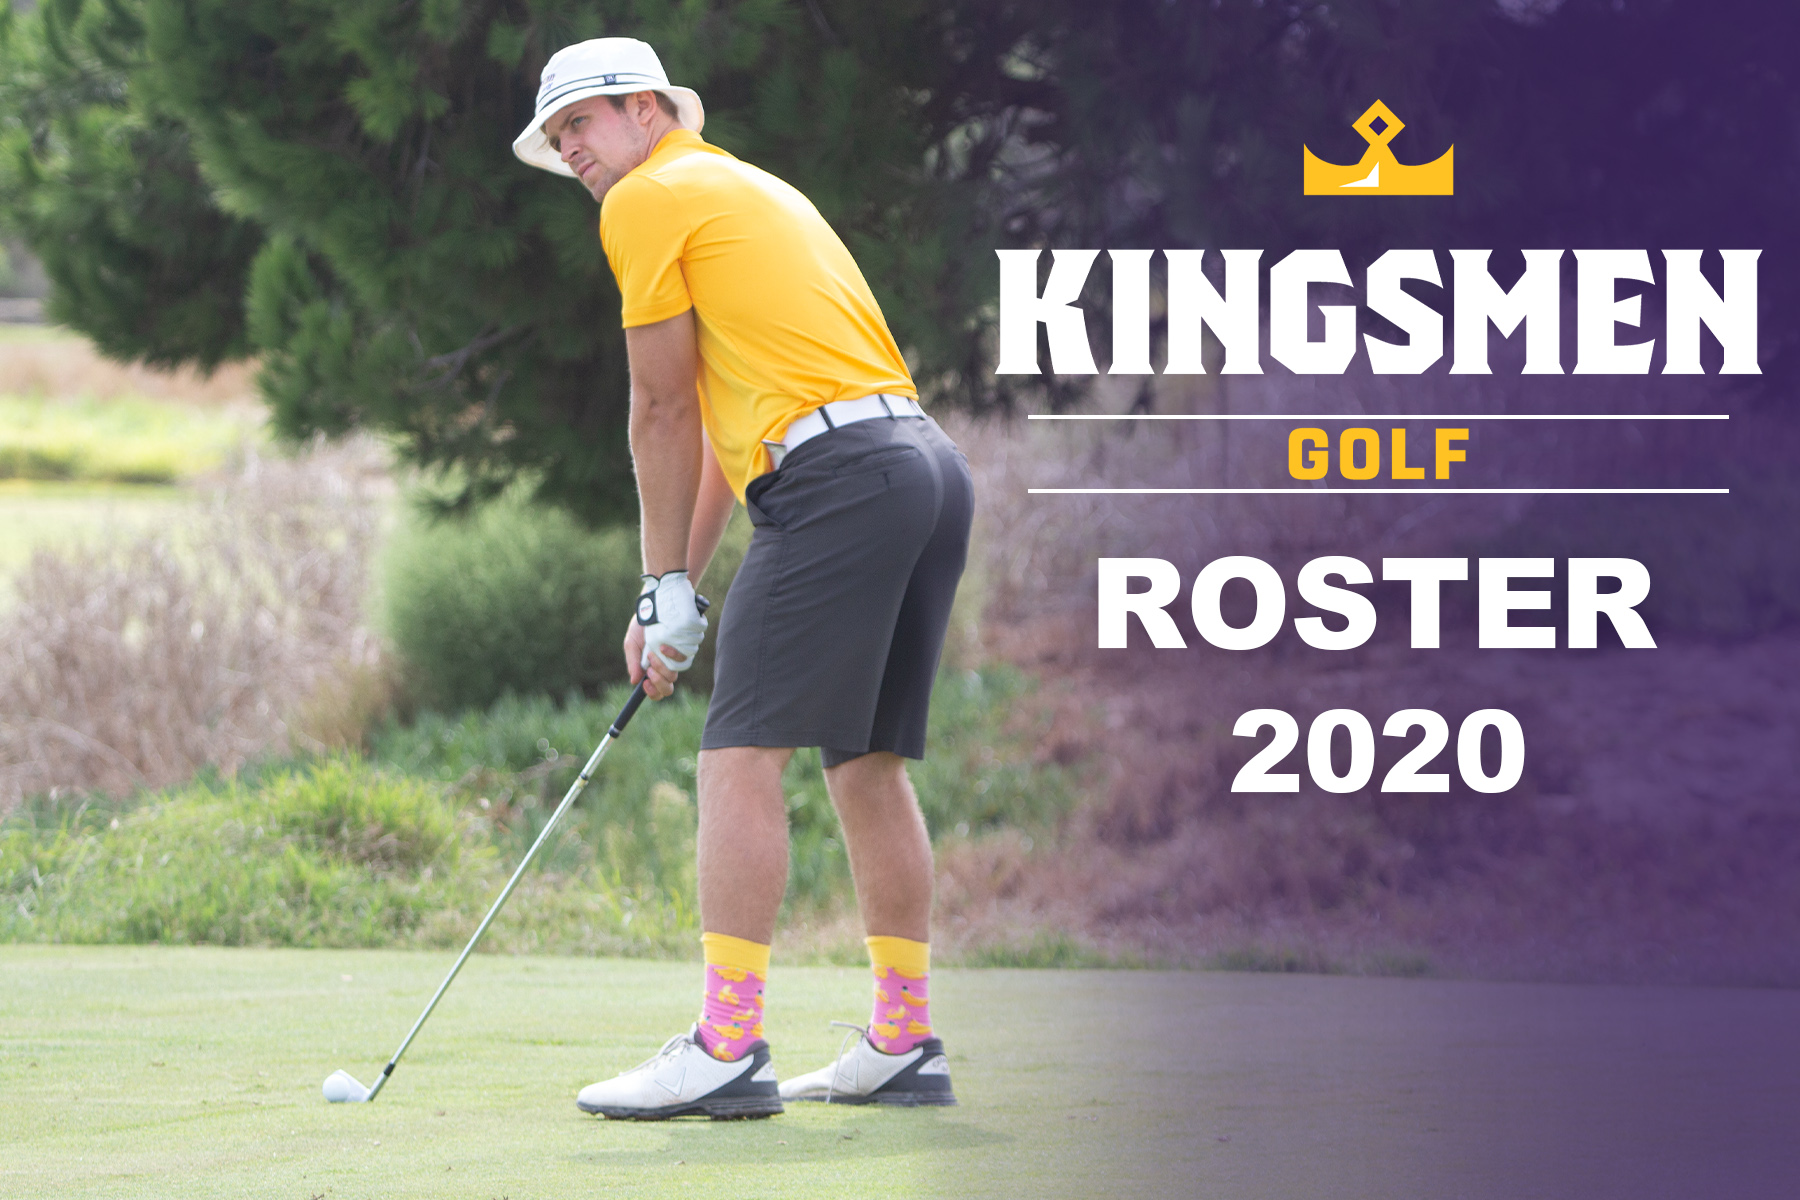 Kingsmen Golf Brings Experience with 2020 Roster